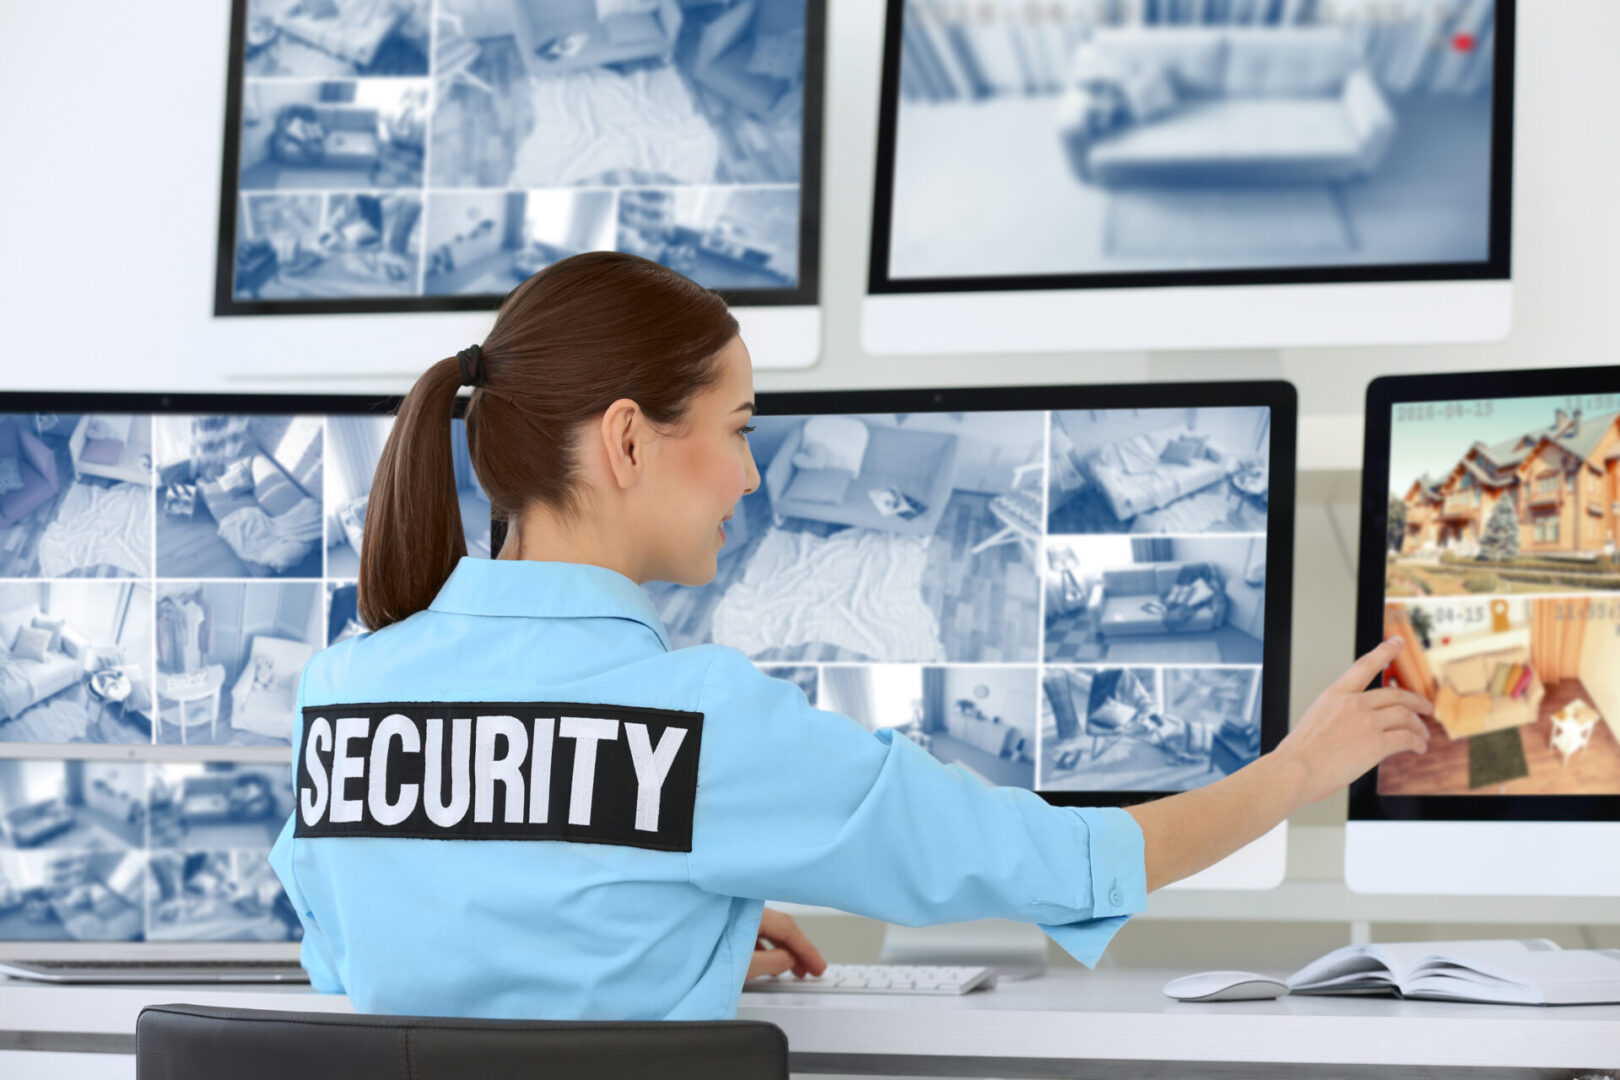 A security guard sitting at her desk in front of multiple monitors.